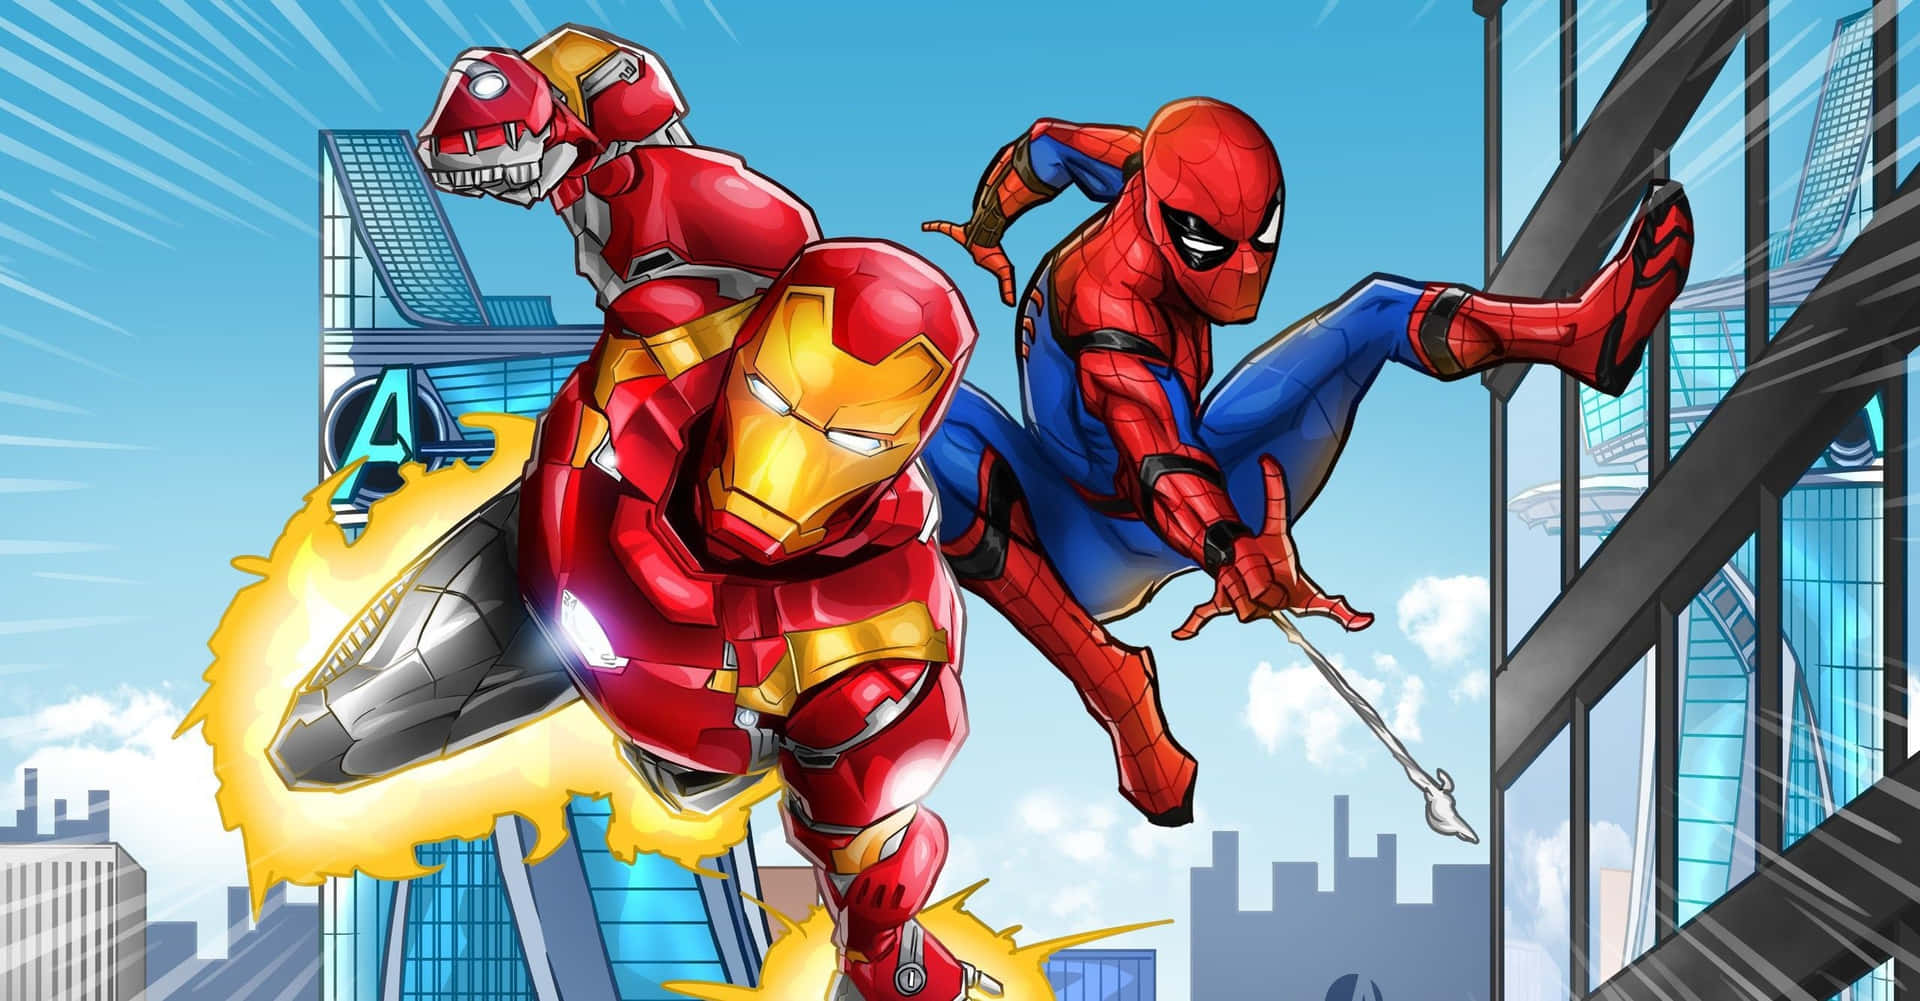 A Marvelous Alliance between Iron Man and Spider-Man Wallpaper